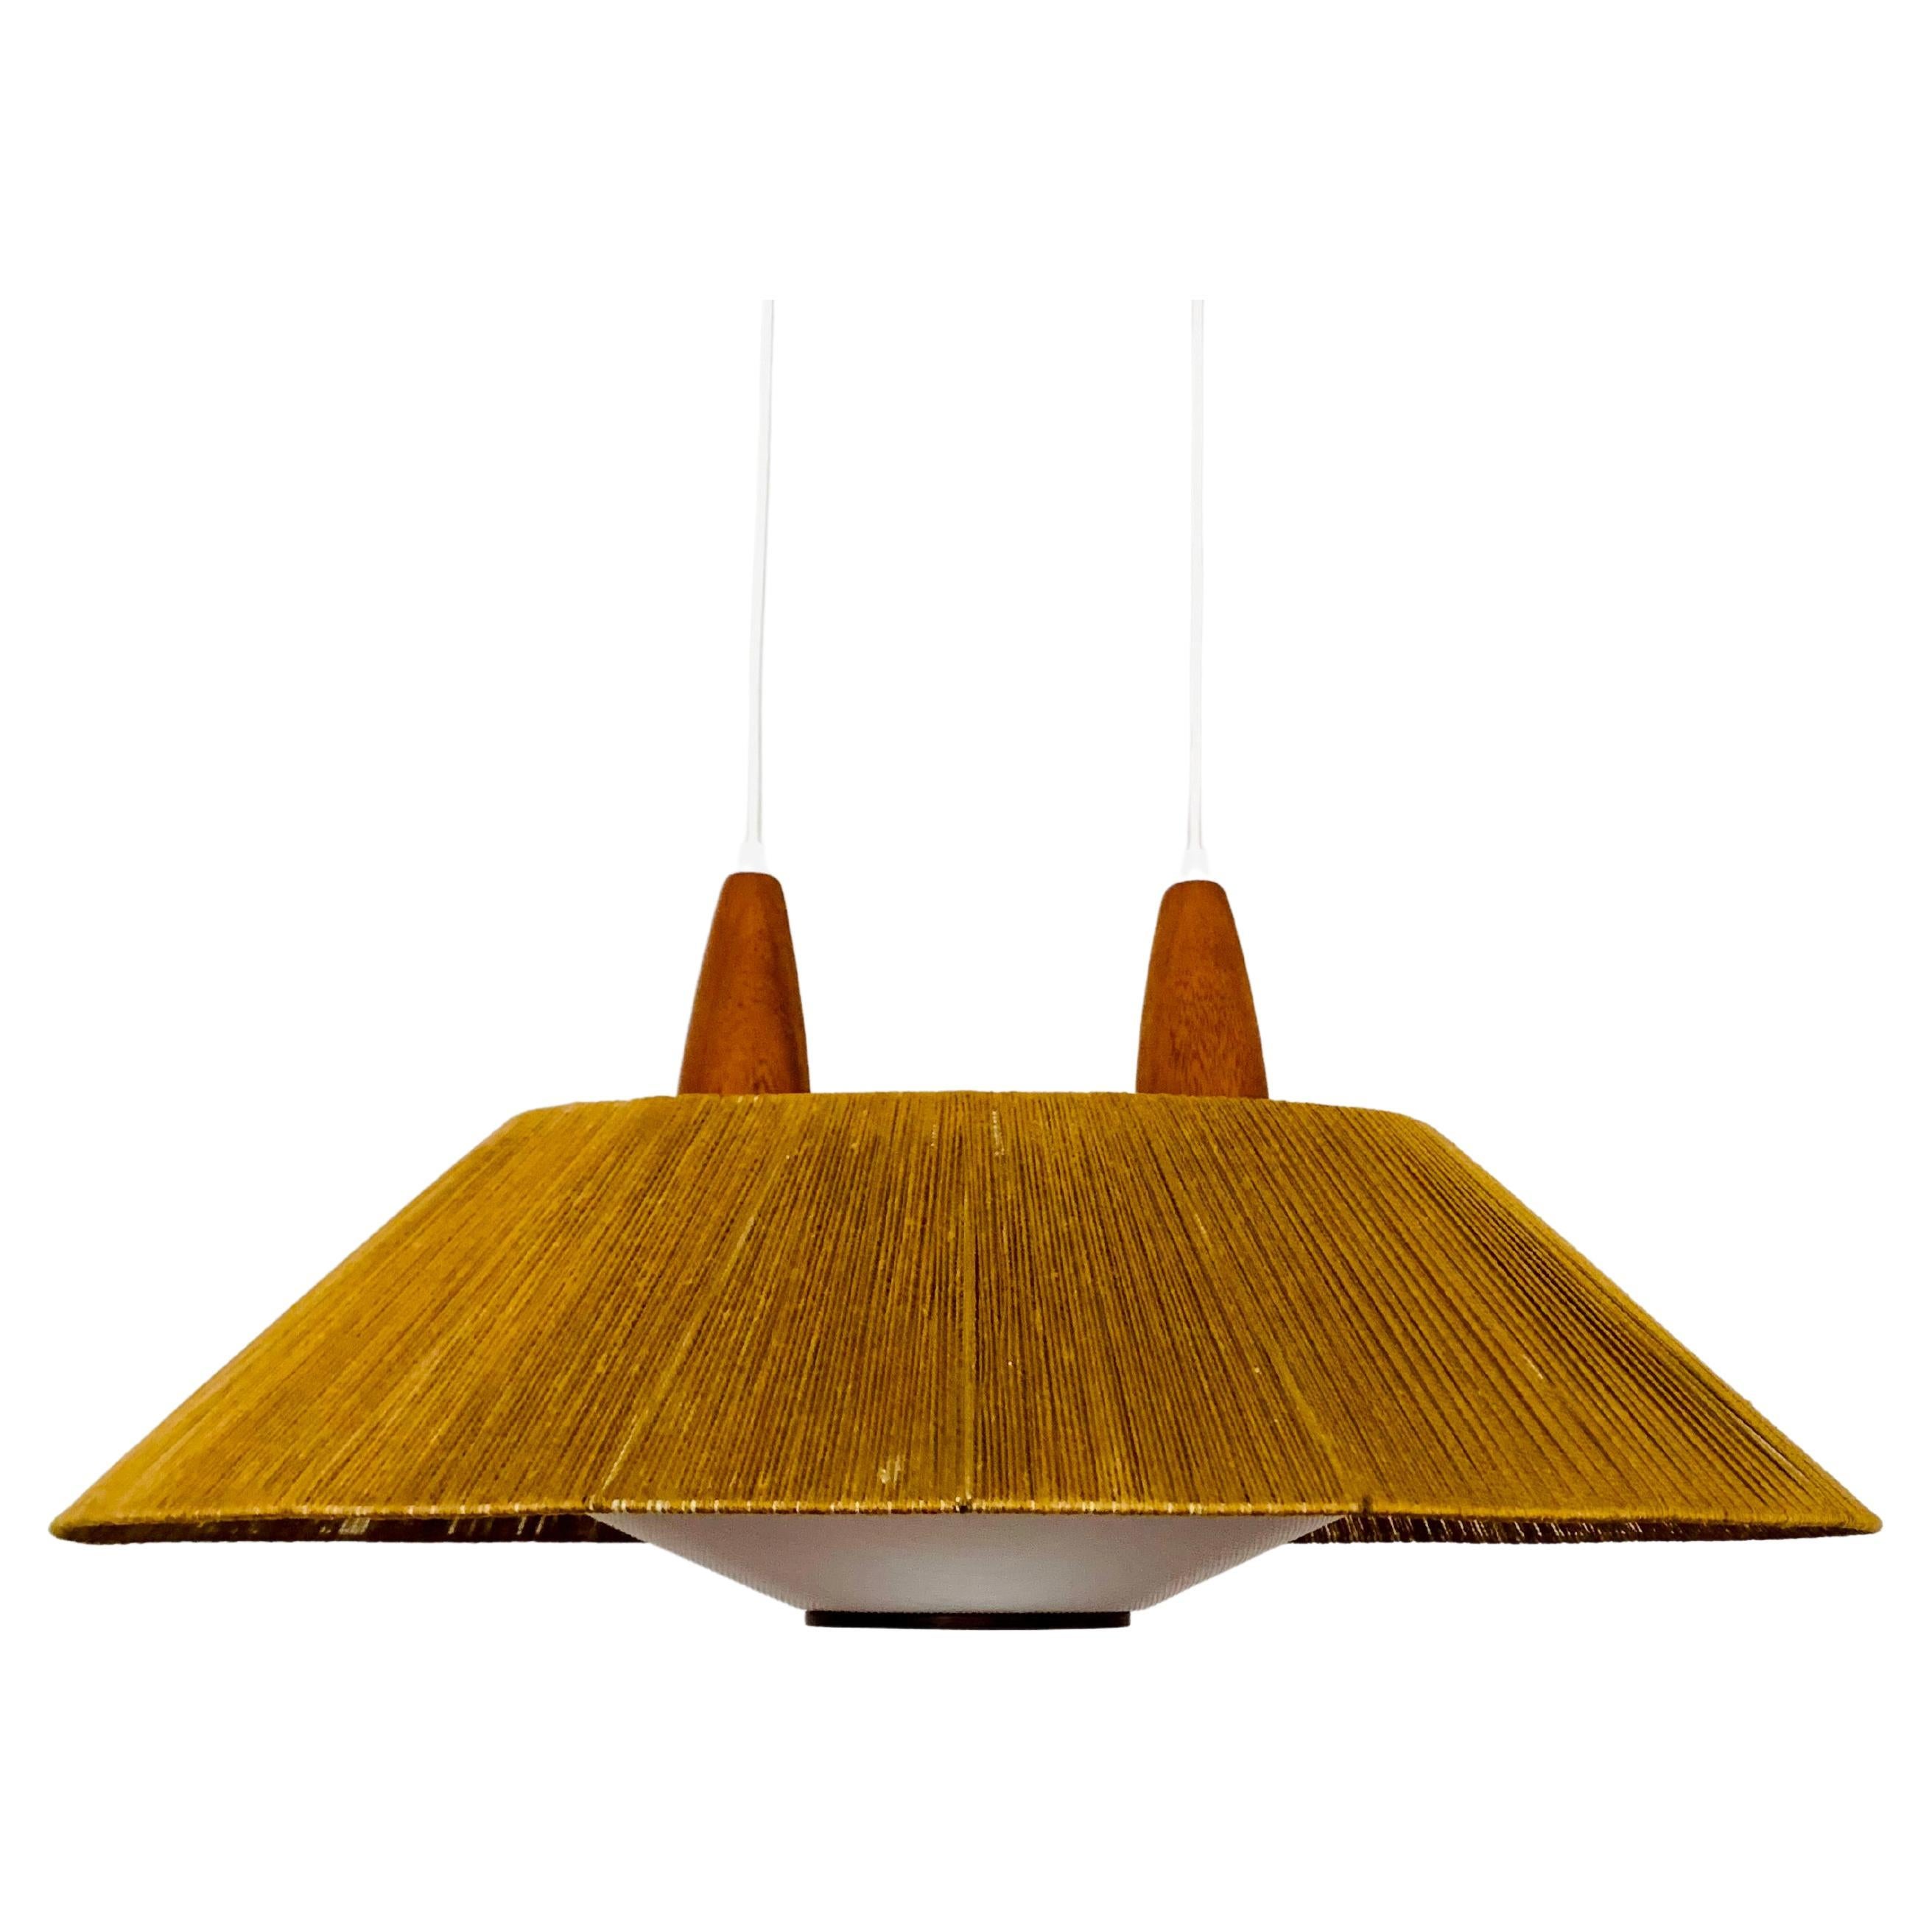 Large Raffia Bast and Teak Pendant Lamp from Temde For Sale